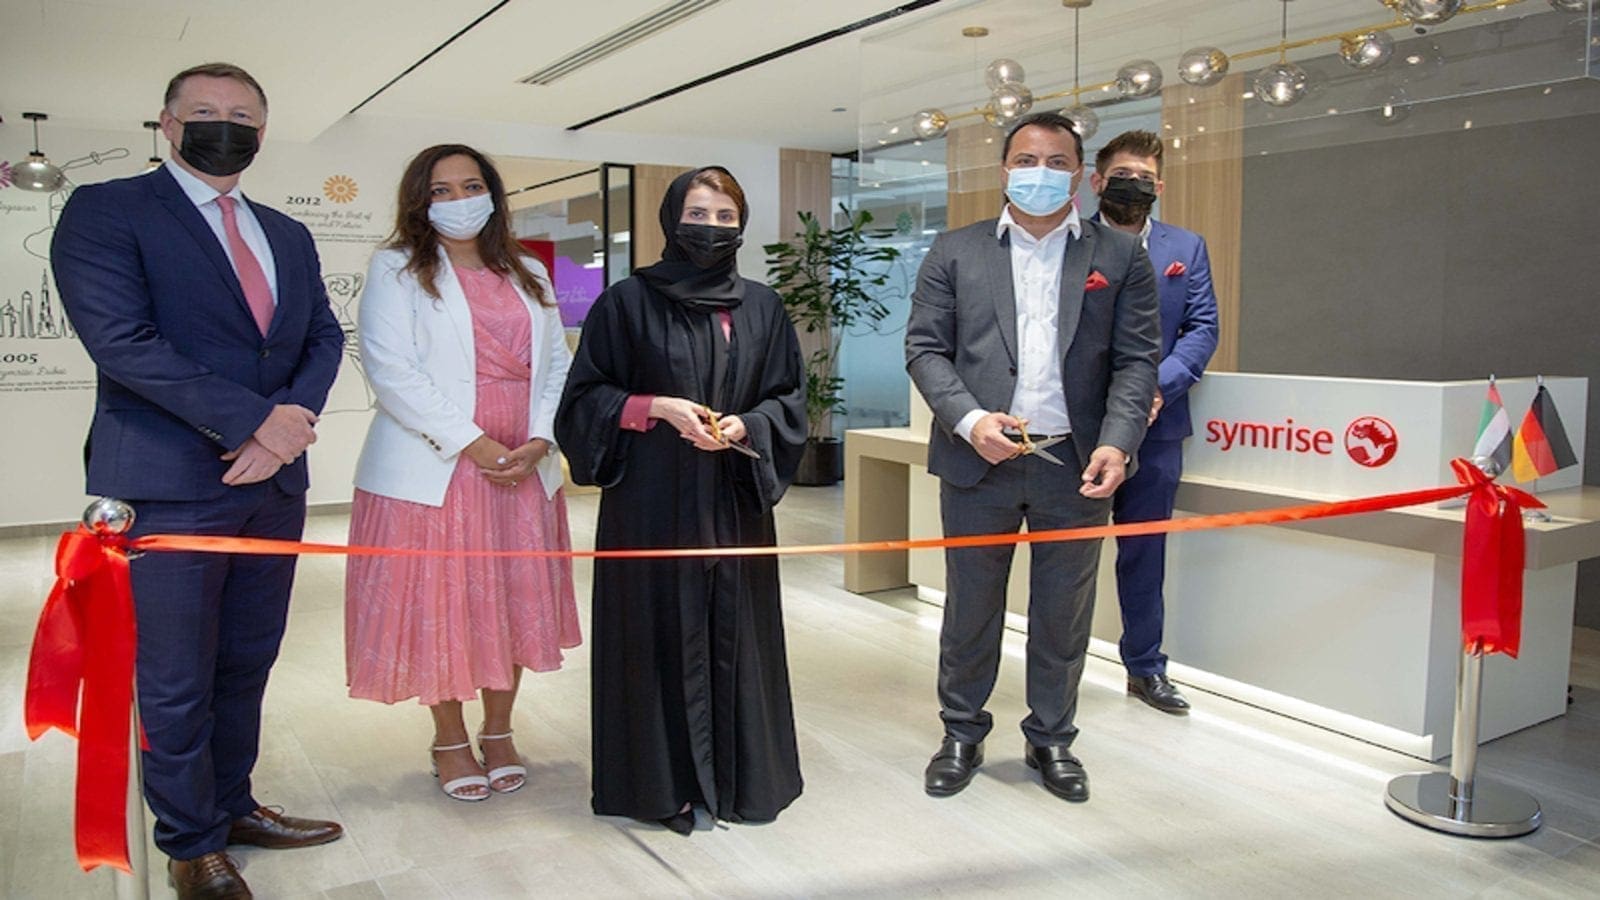 Symrise opens new innovation center in Dubai to better serve Middle East clients